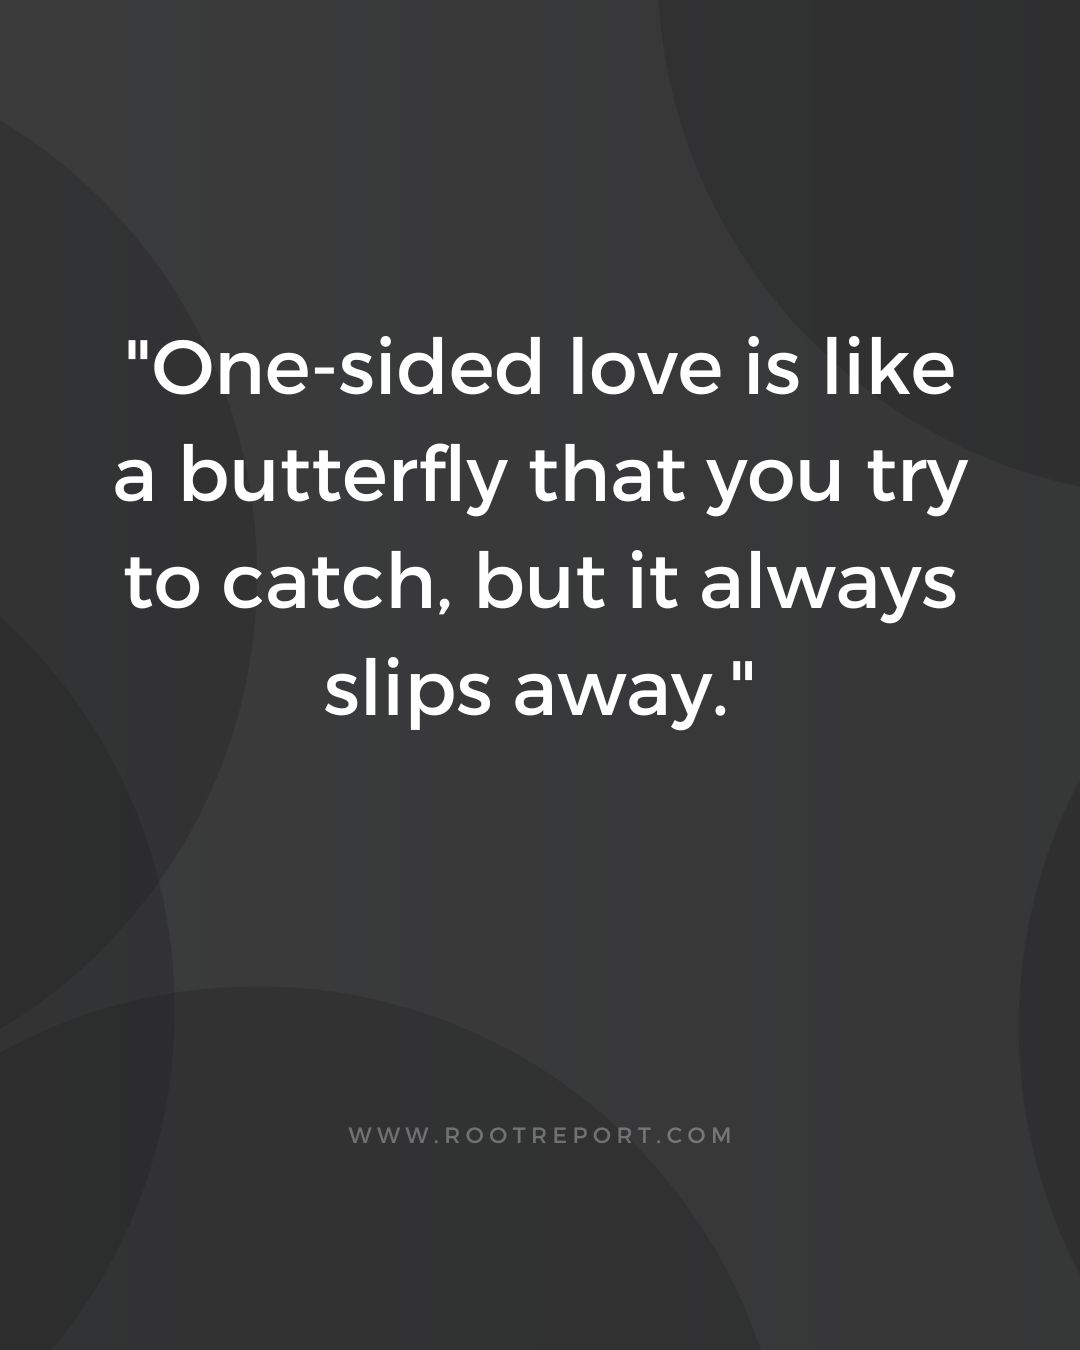 100 Emotional One Sided Love Quotes and Captions [With Images]